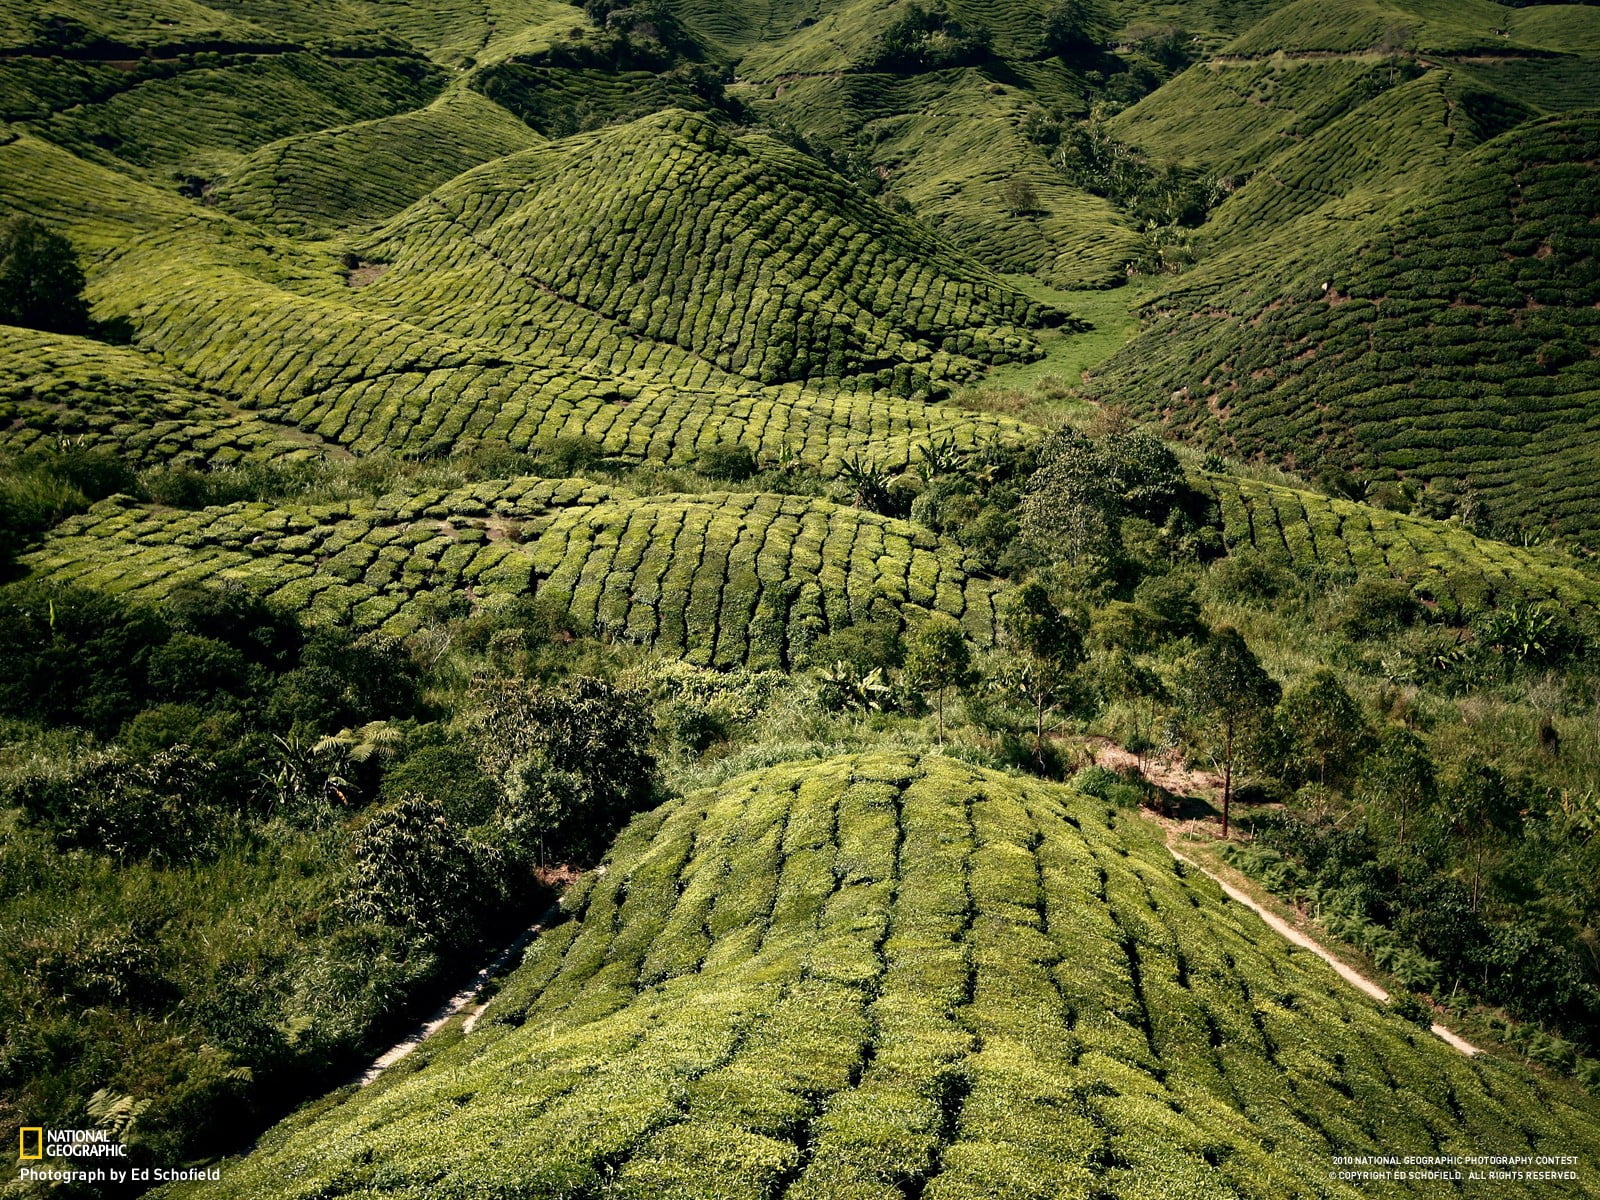 green leafed plant covered mountain, National Geographic, landscape, field, Malaysia